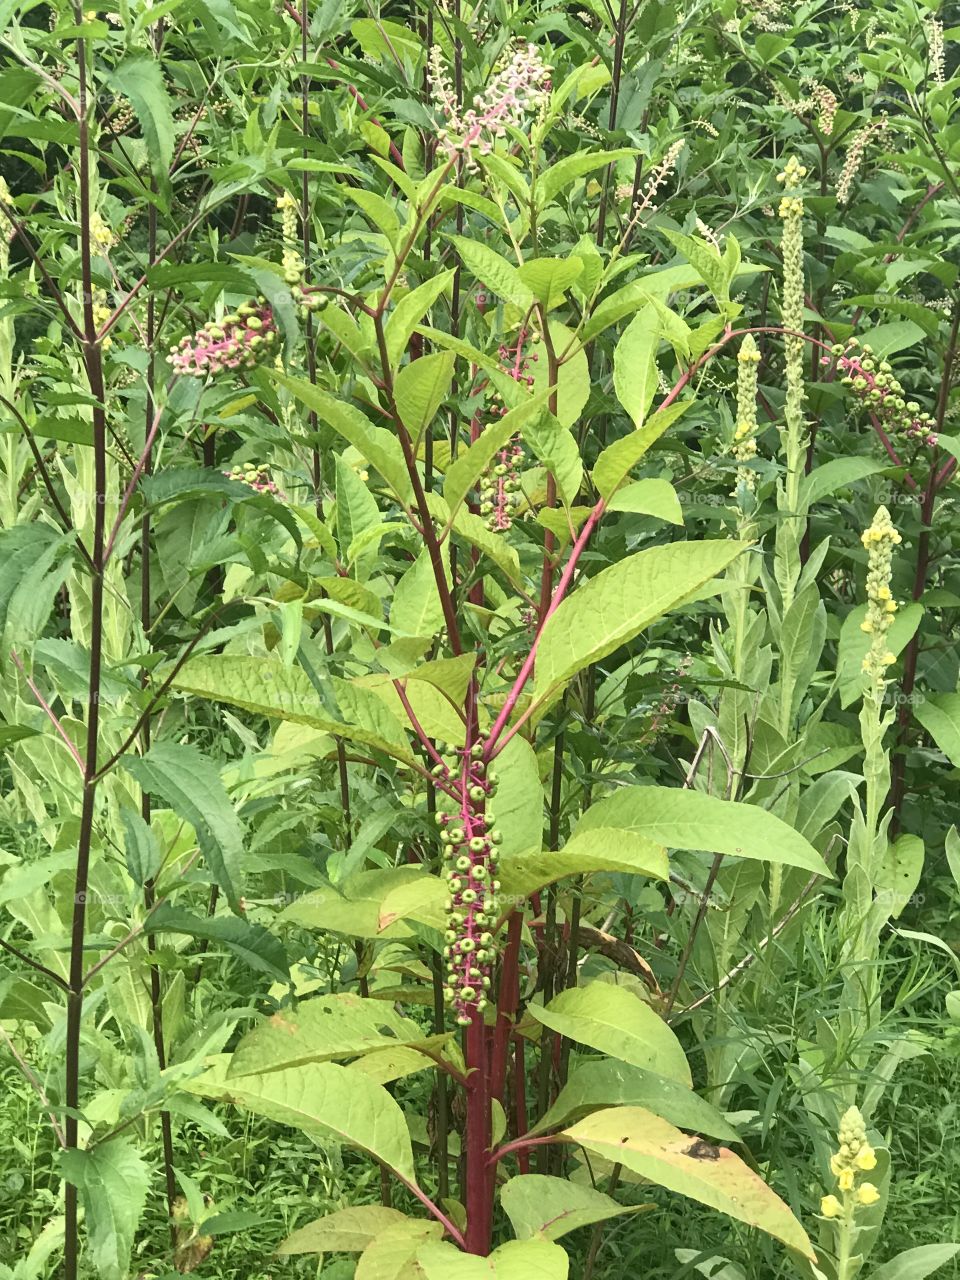 Pokeweed growing wild with other weeds in Indiana 